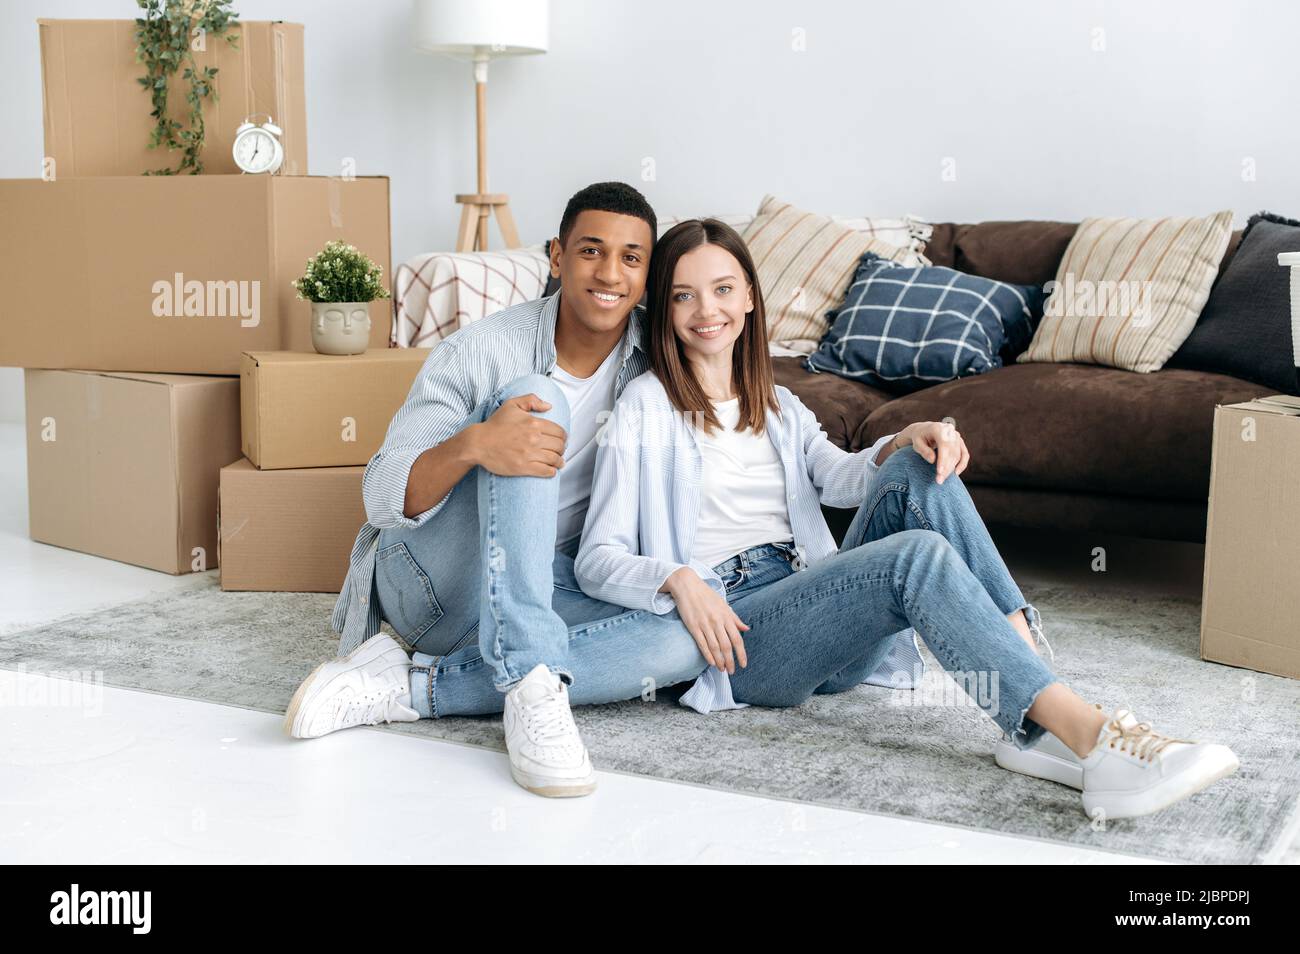 Happy multiracial family couple in love, hispanic guy and caucasian girl, sit on the floor in the living room of their new home, between cardboard boxes with household items, look at the camera, smile Stock Photo